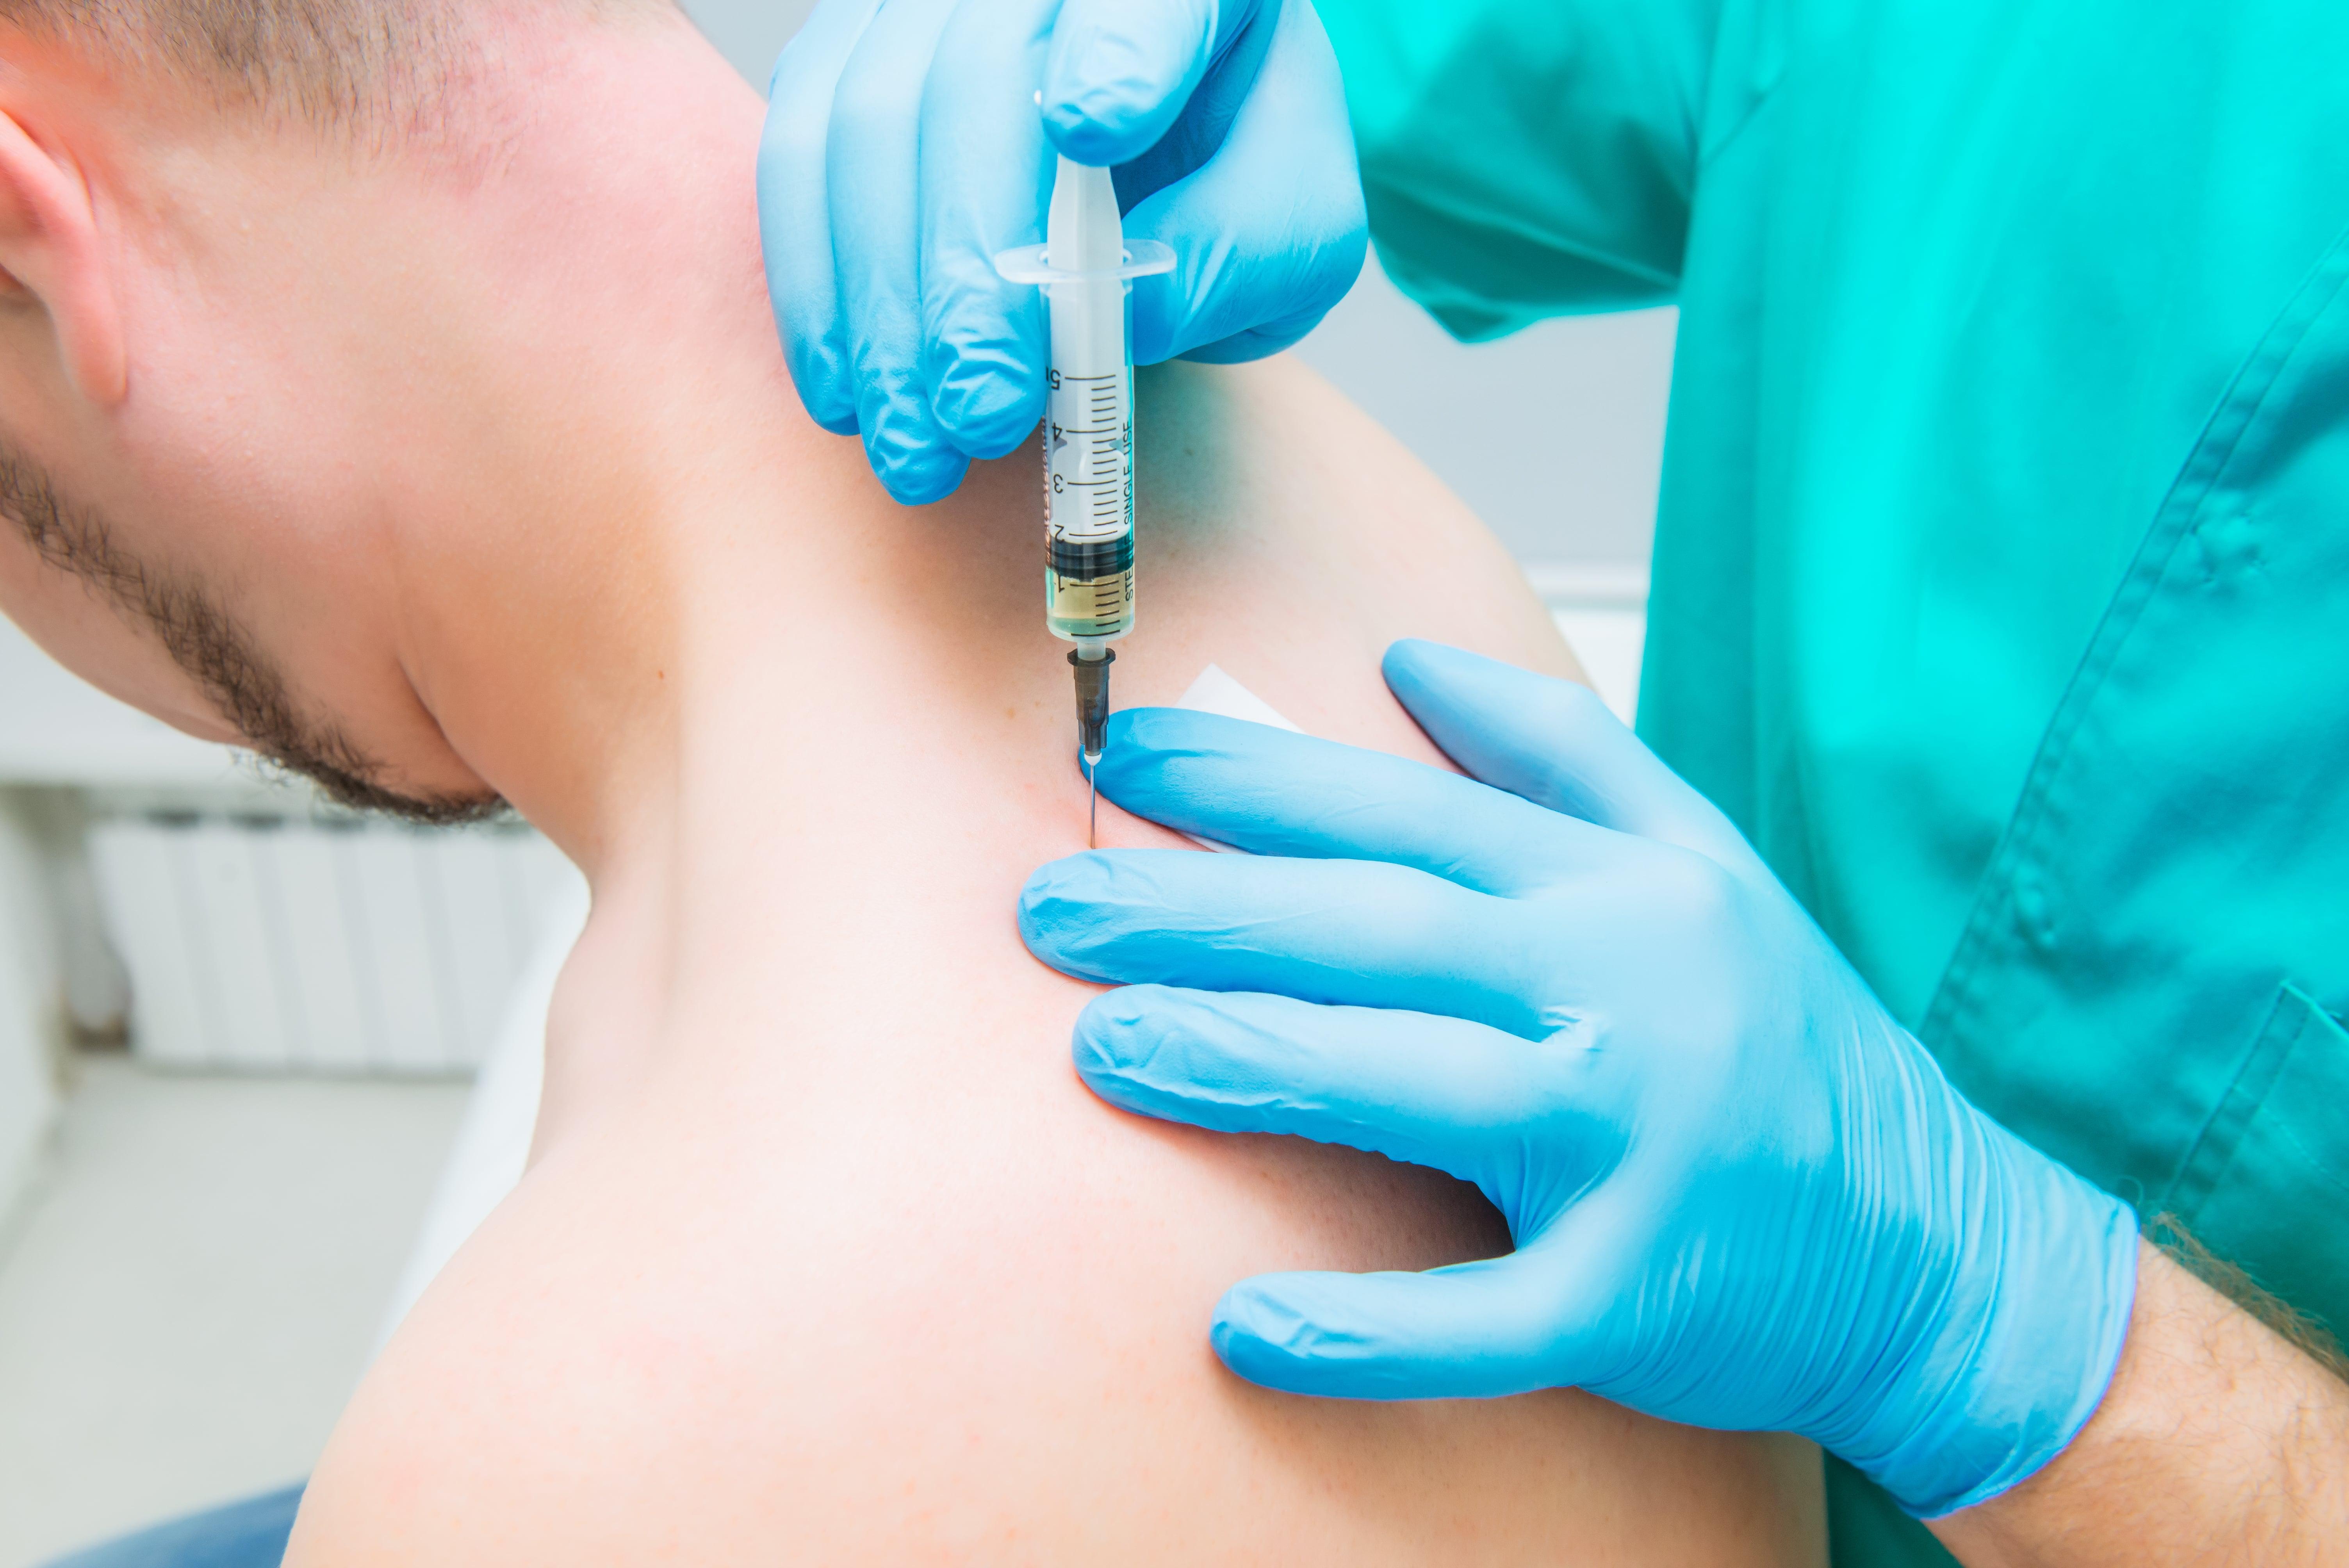 trigger point injections with botox